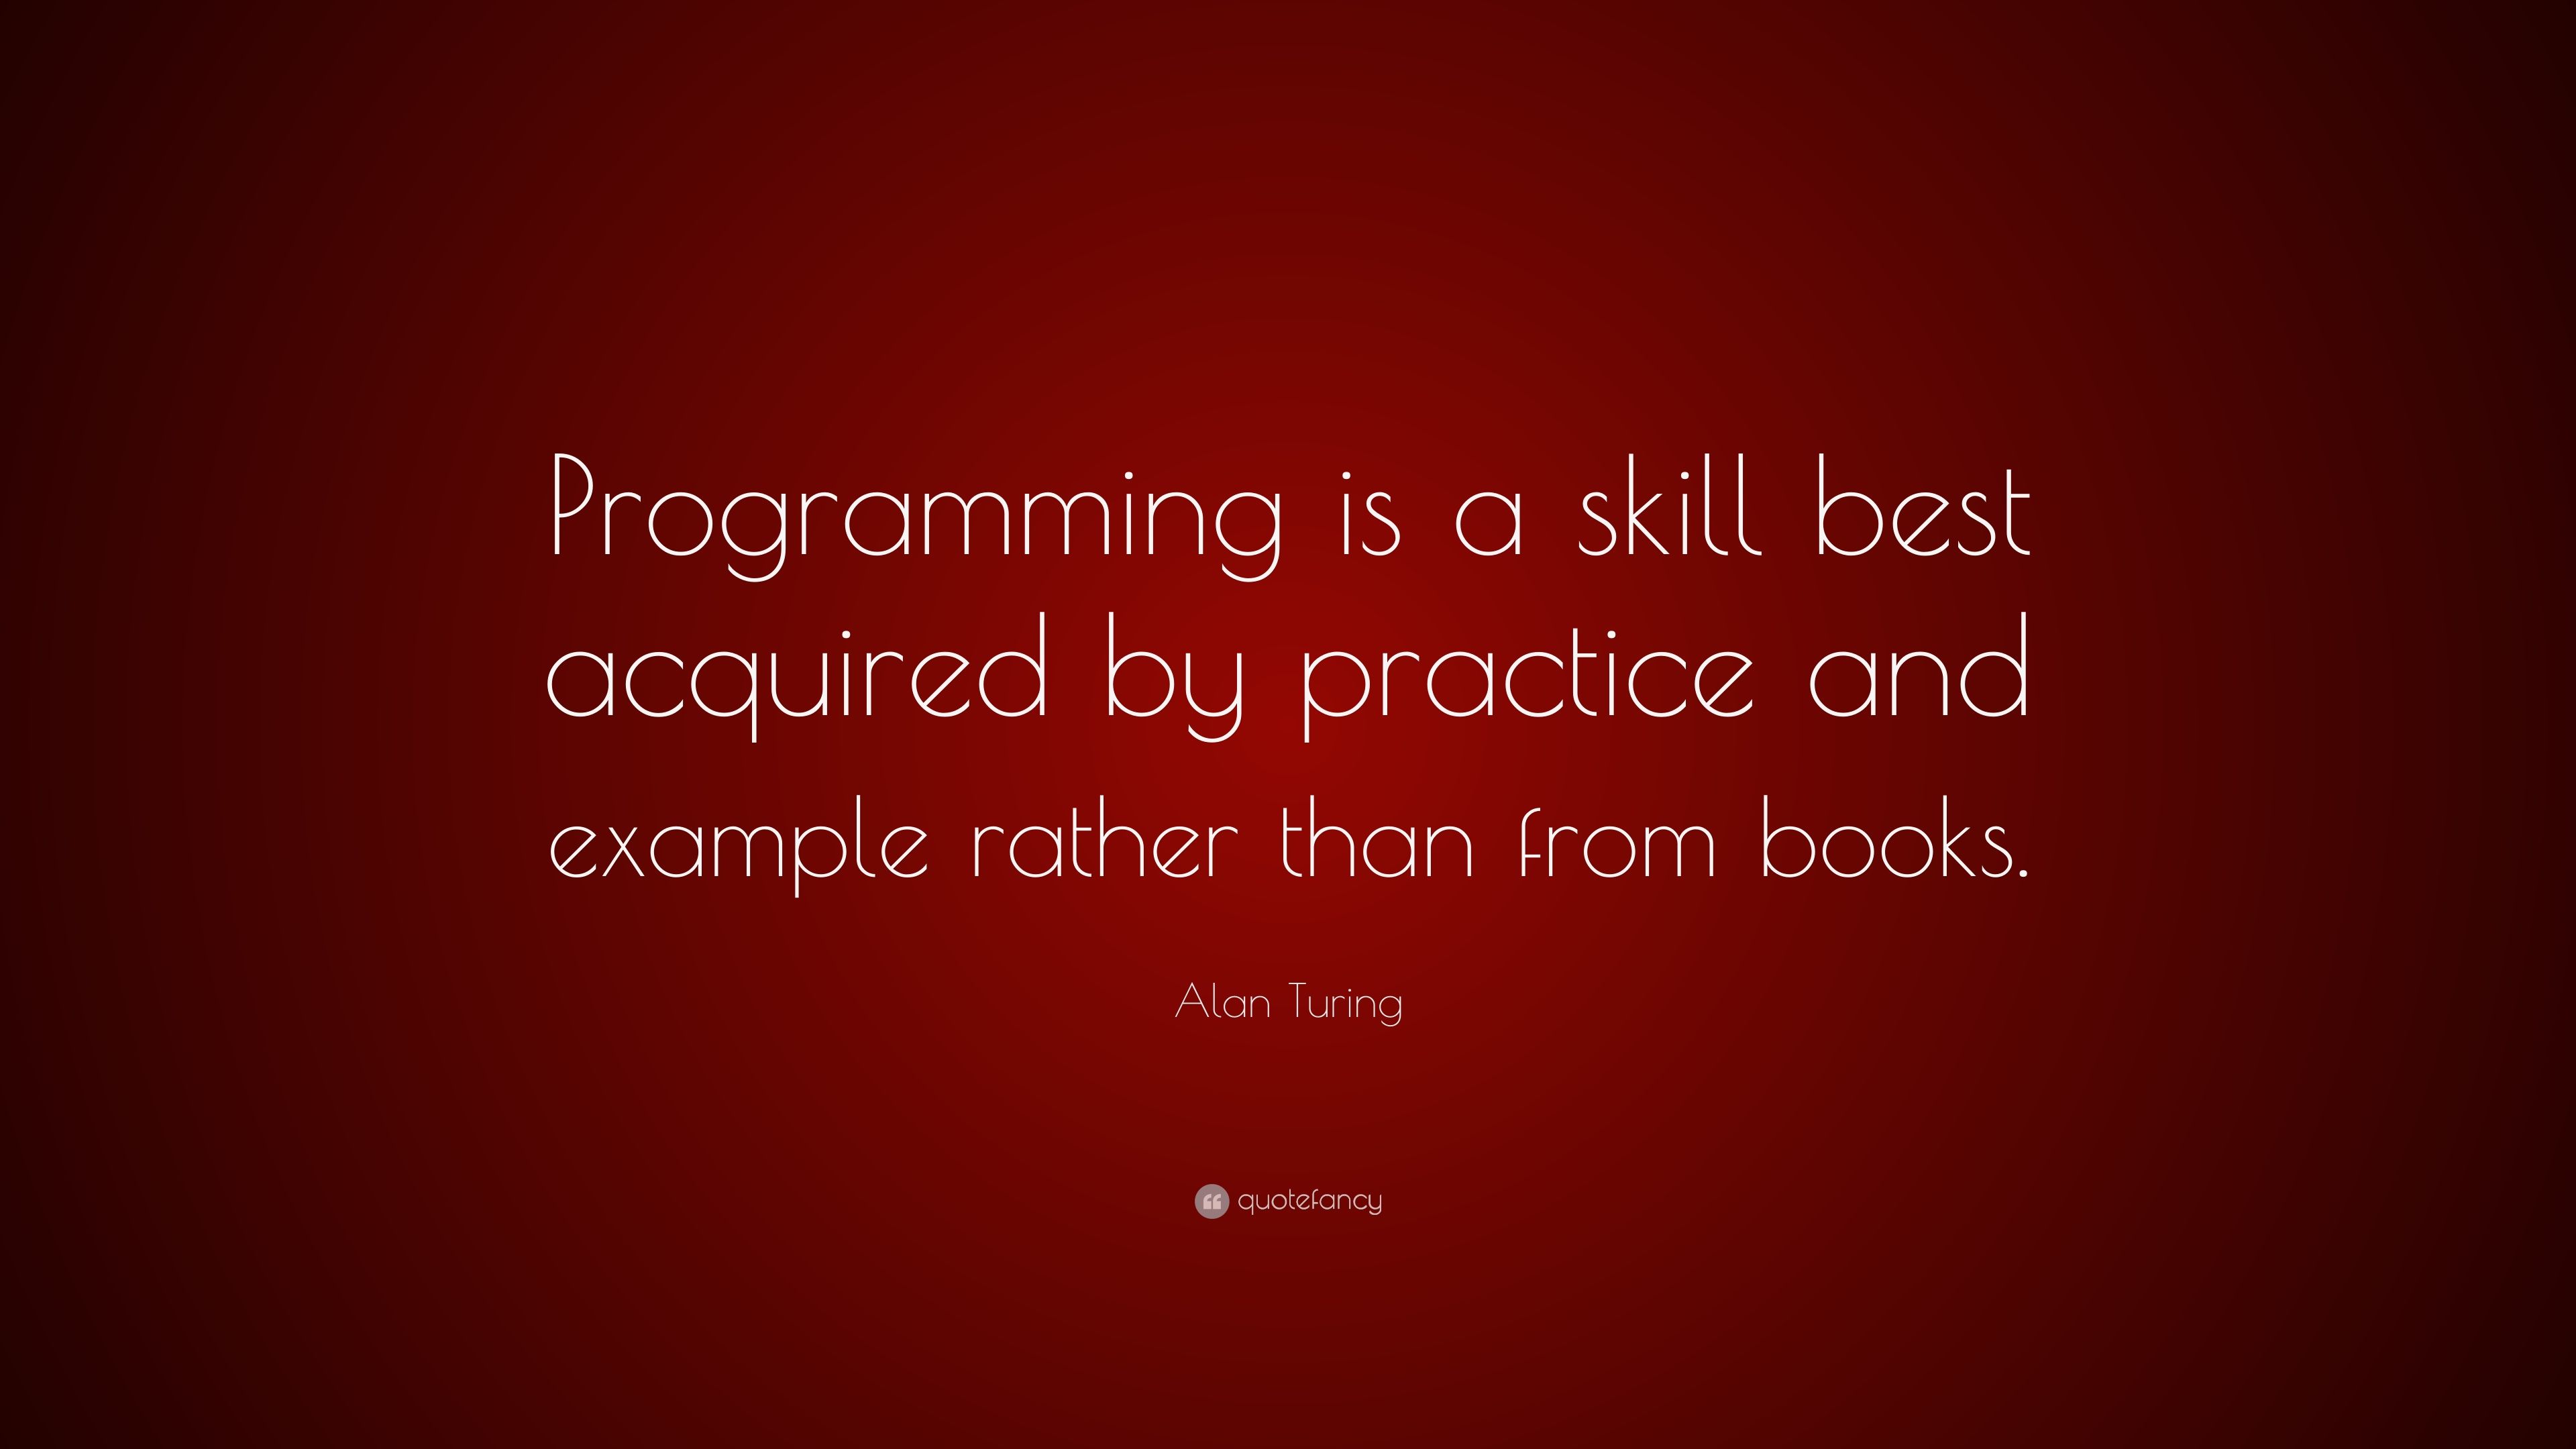 Programming and business quotes Quotes about skills 40 wallpaper quotefancy